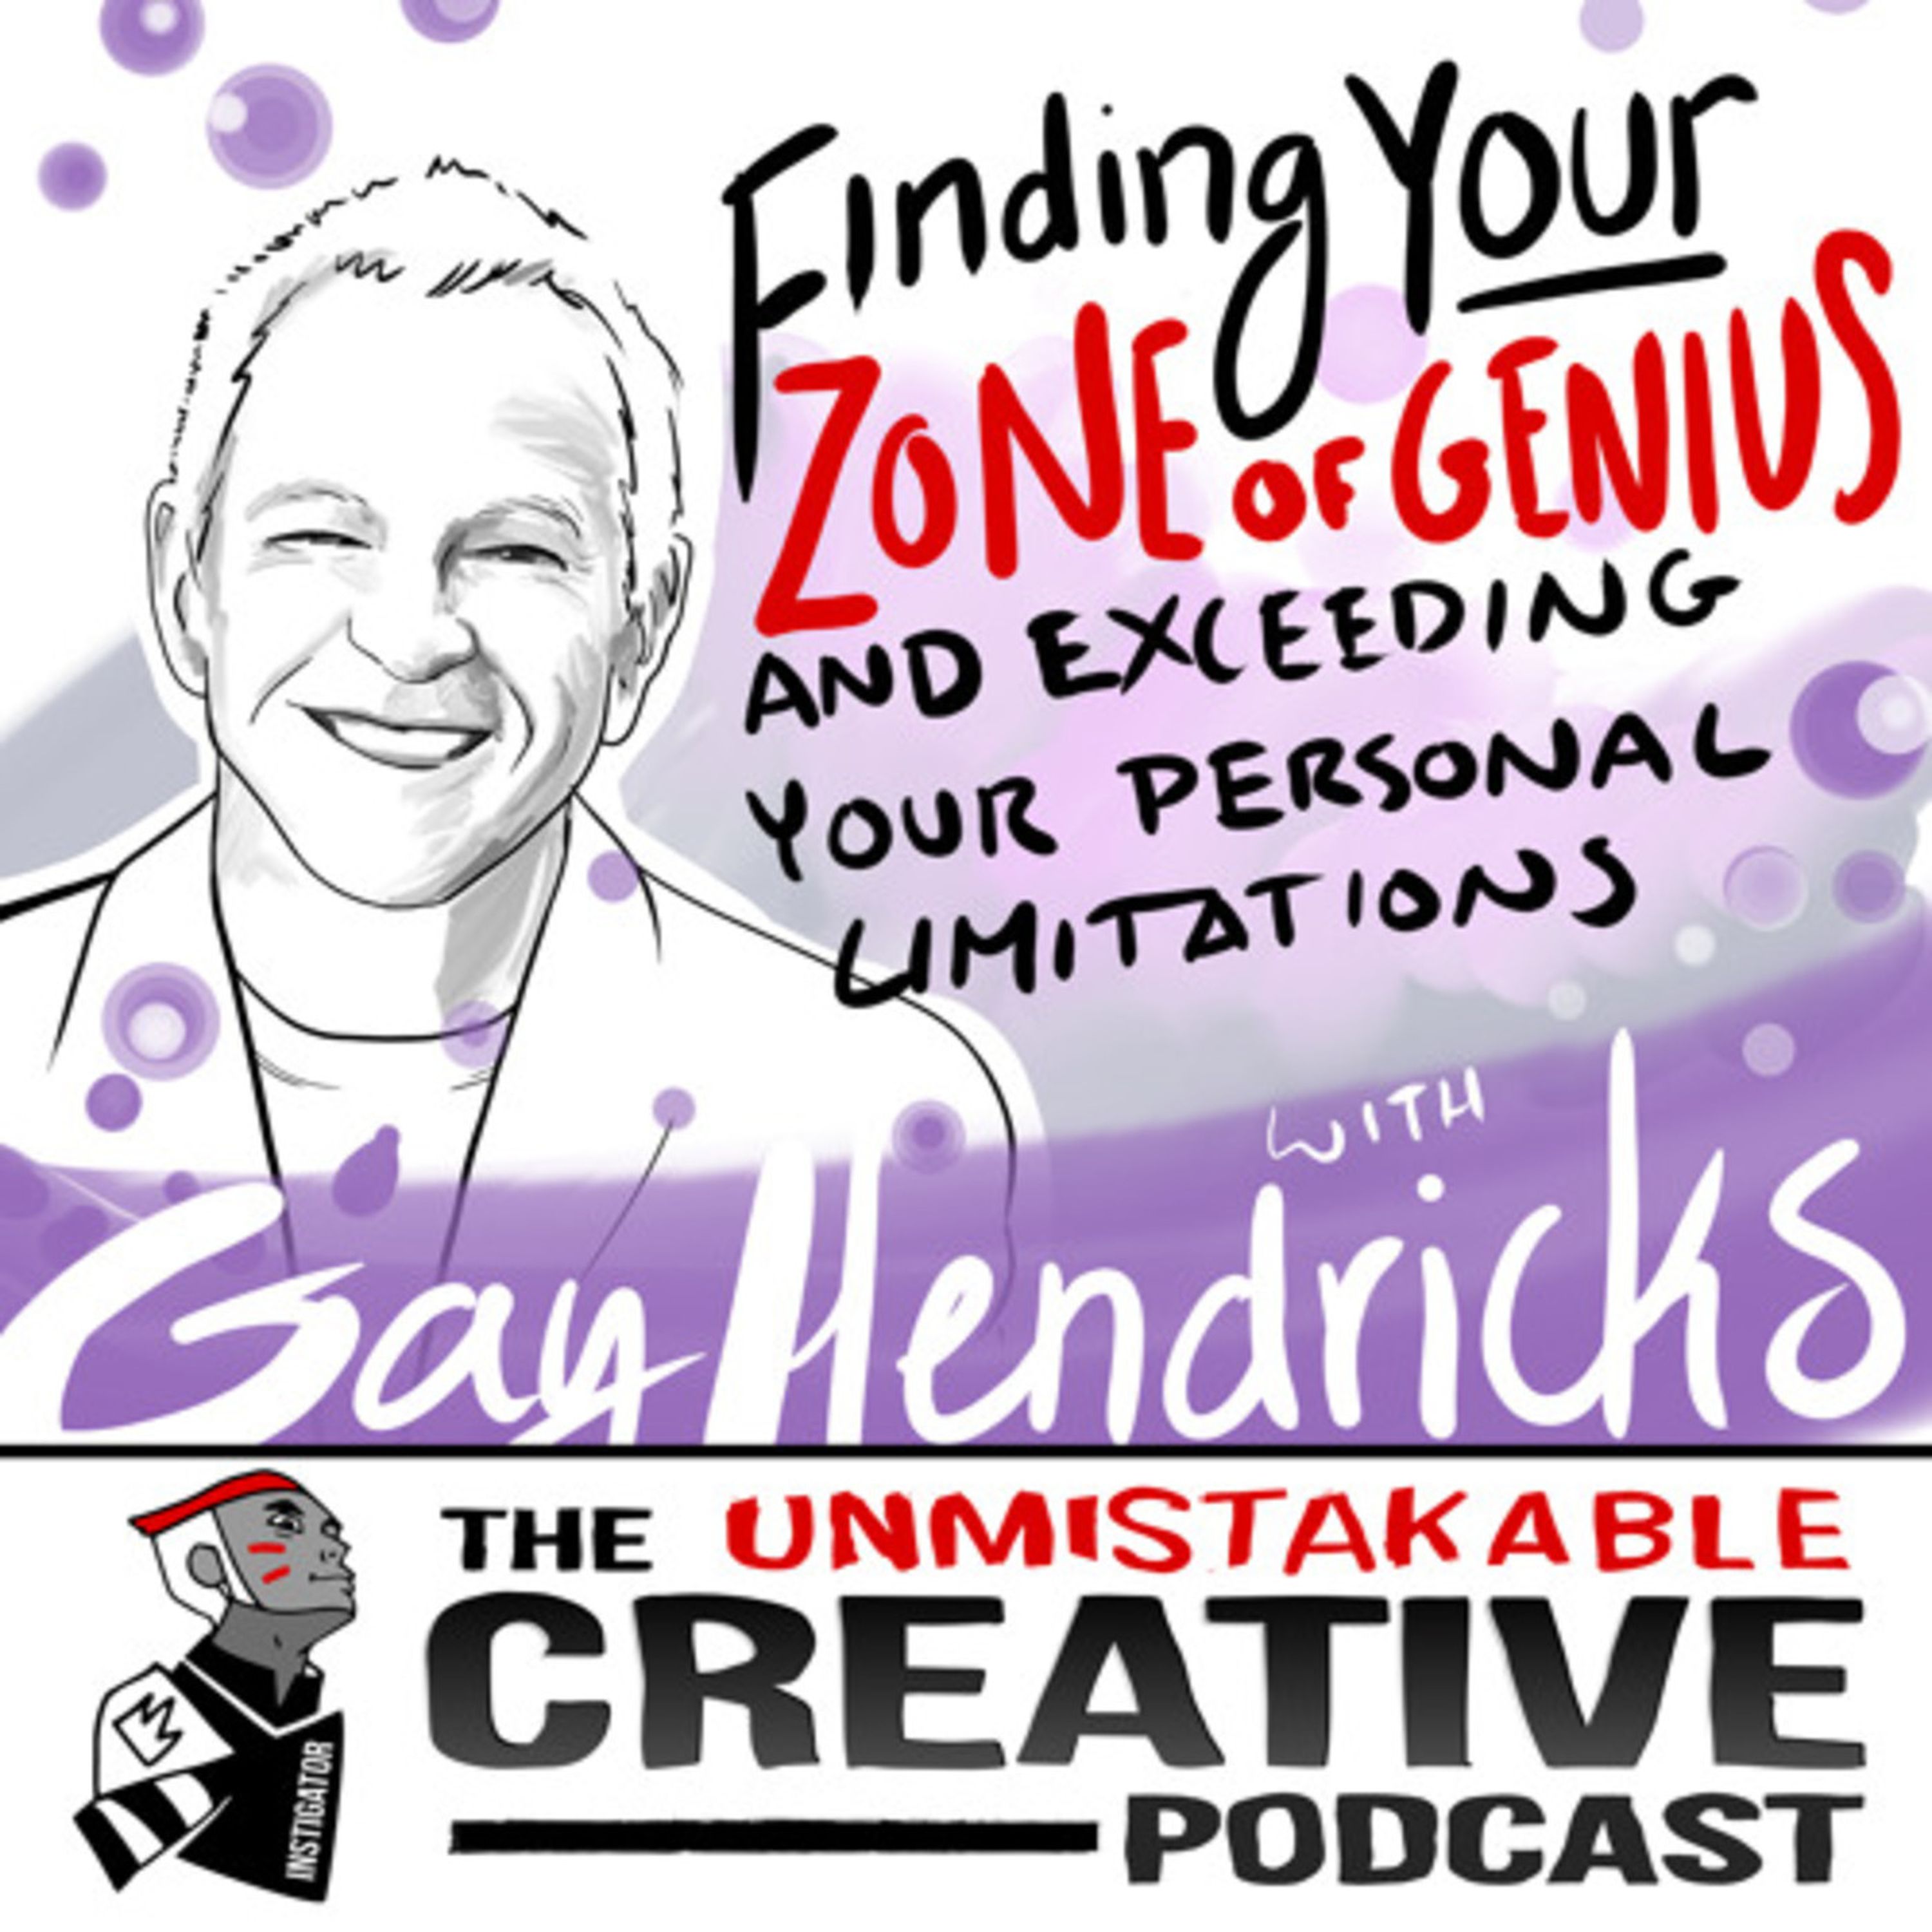 Finding Your Zone of Genius and Exceeding Your Personal Limitations with Gay Hendricks Image